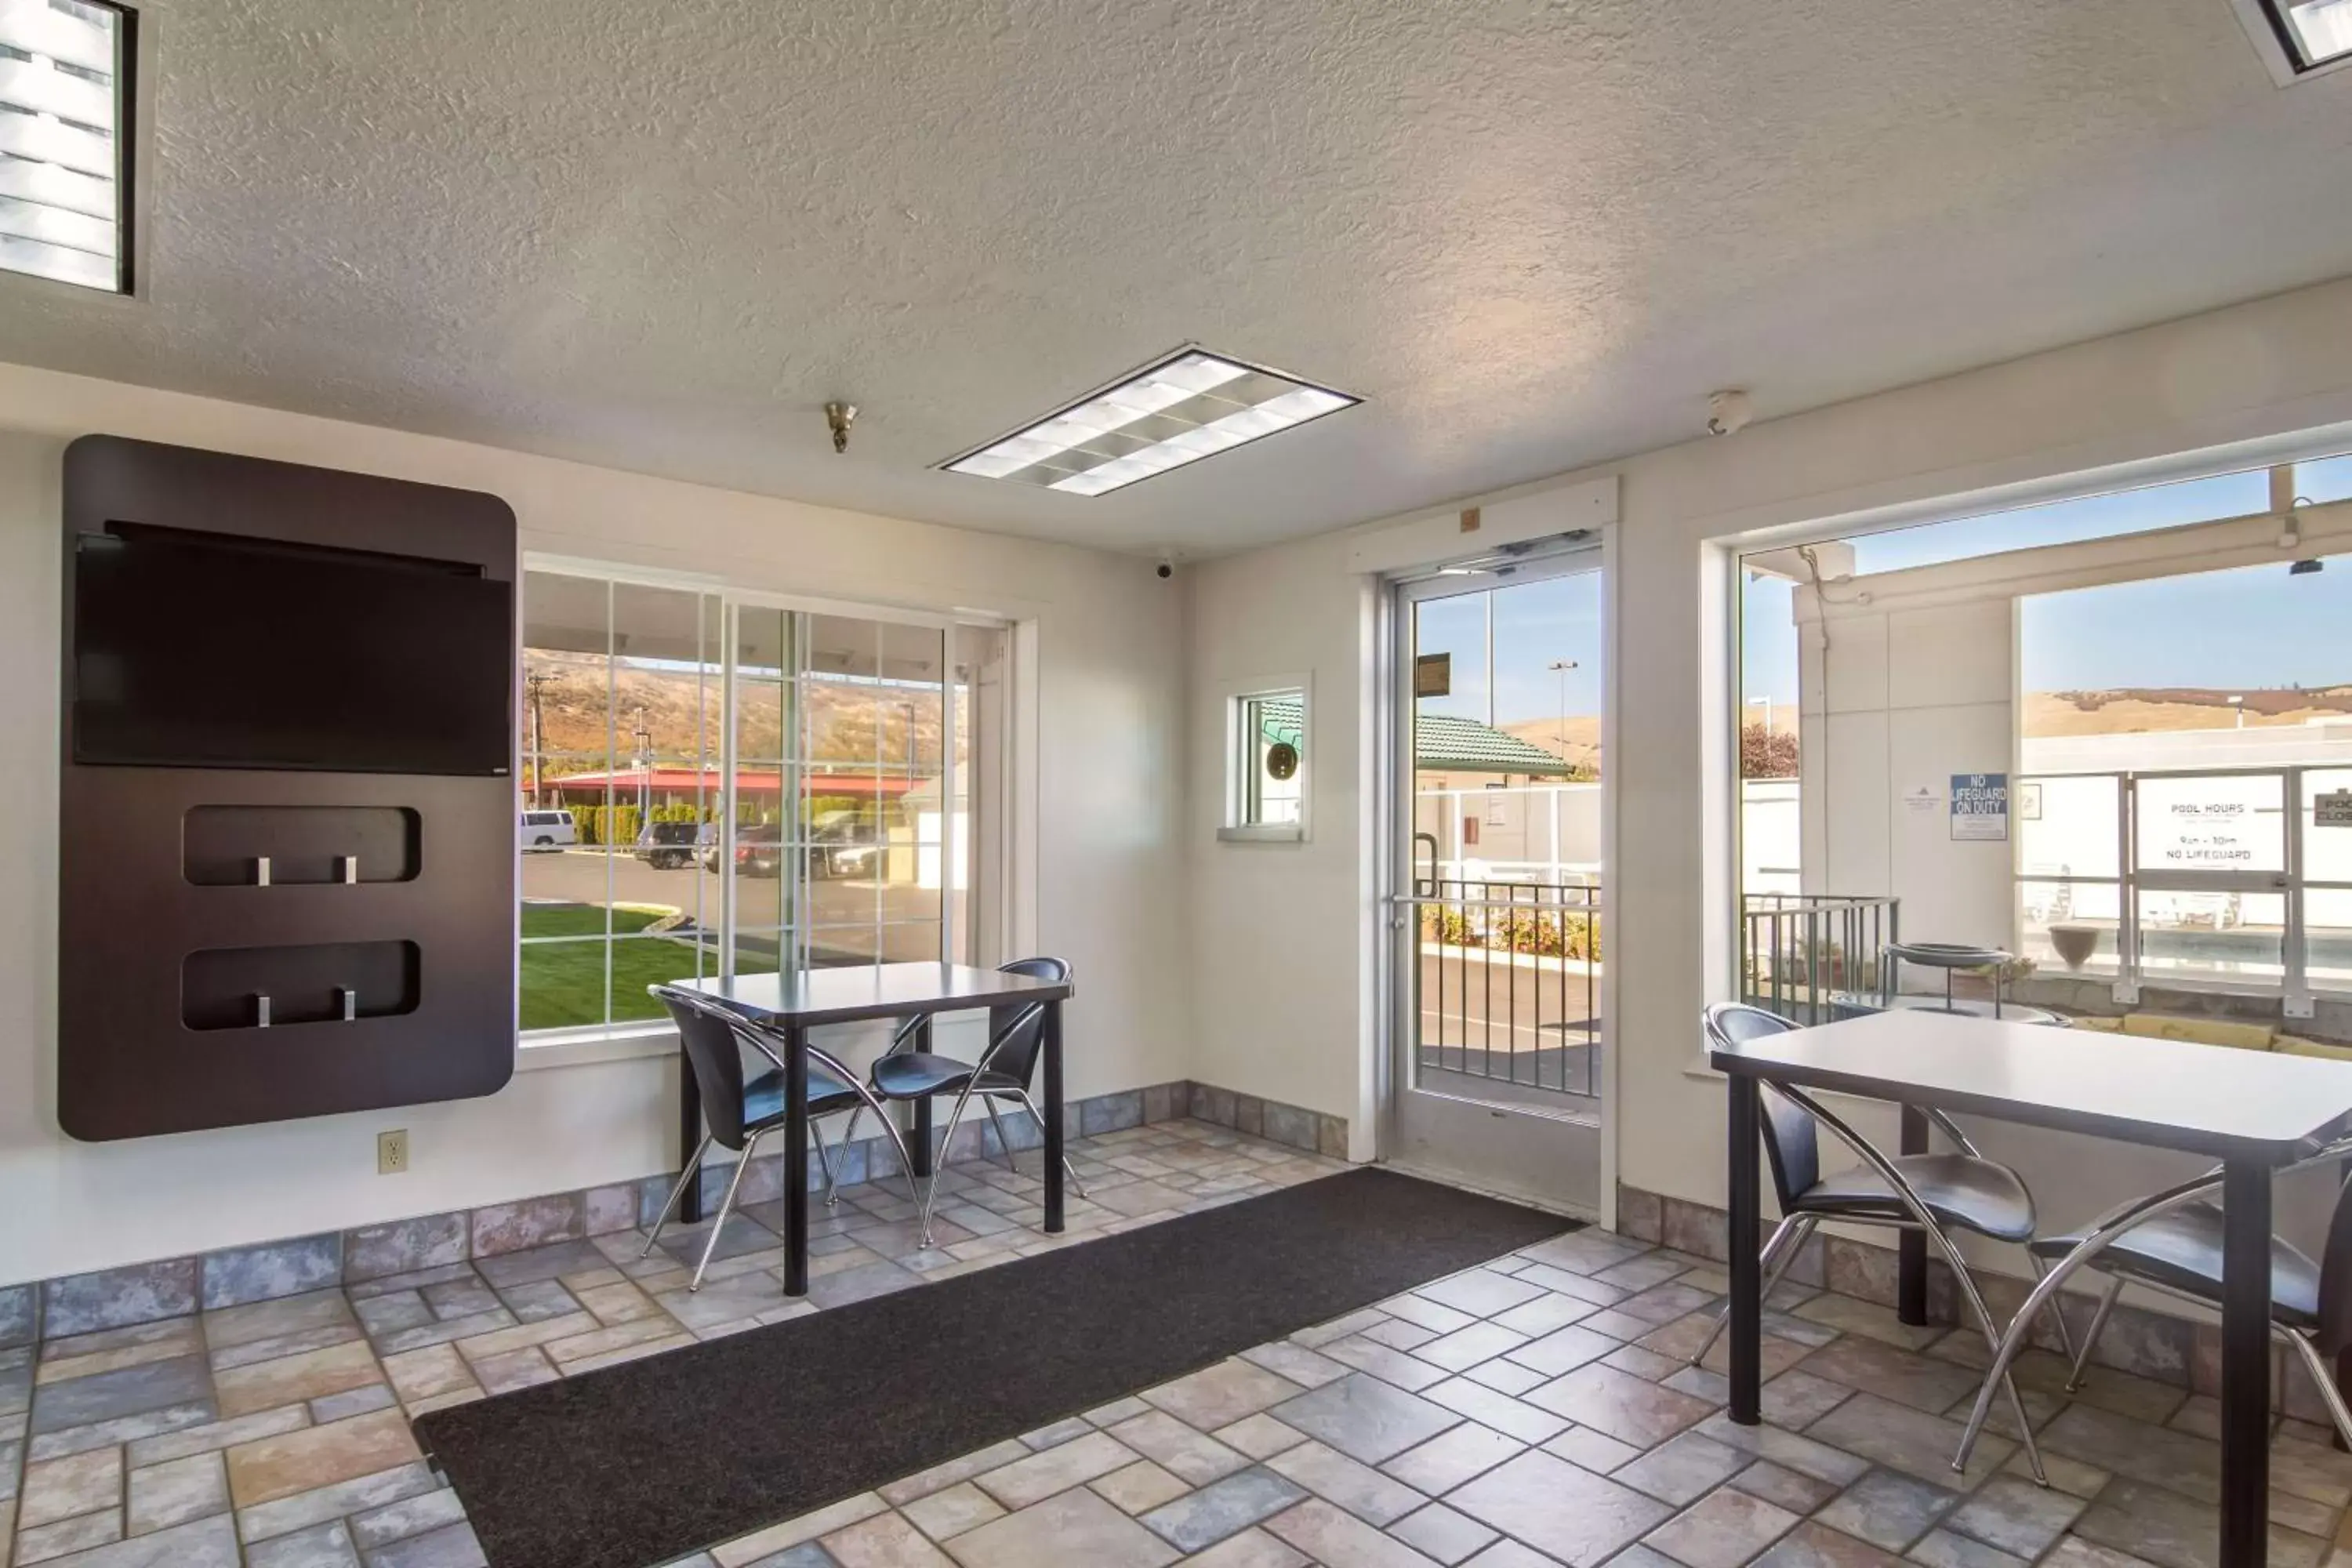 Lobby or reception in Motel 6-The Dalles, OR